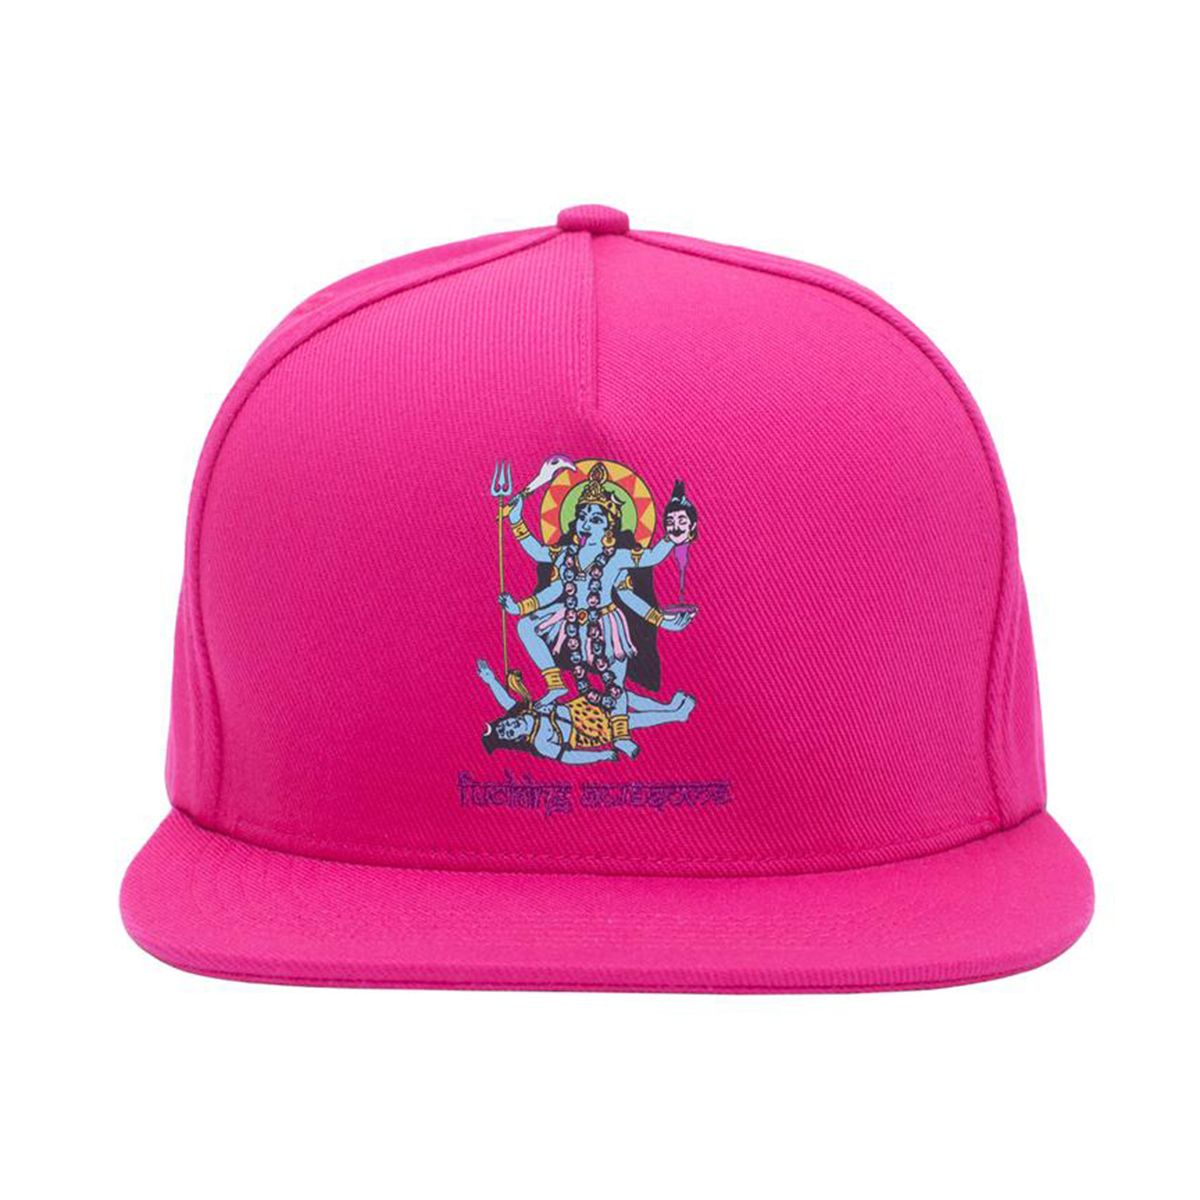 Fucking Awesome - Gorro Snapback Redemption Pink